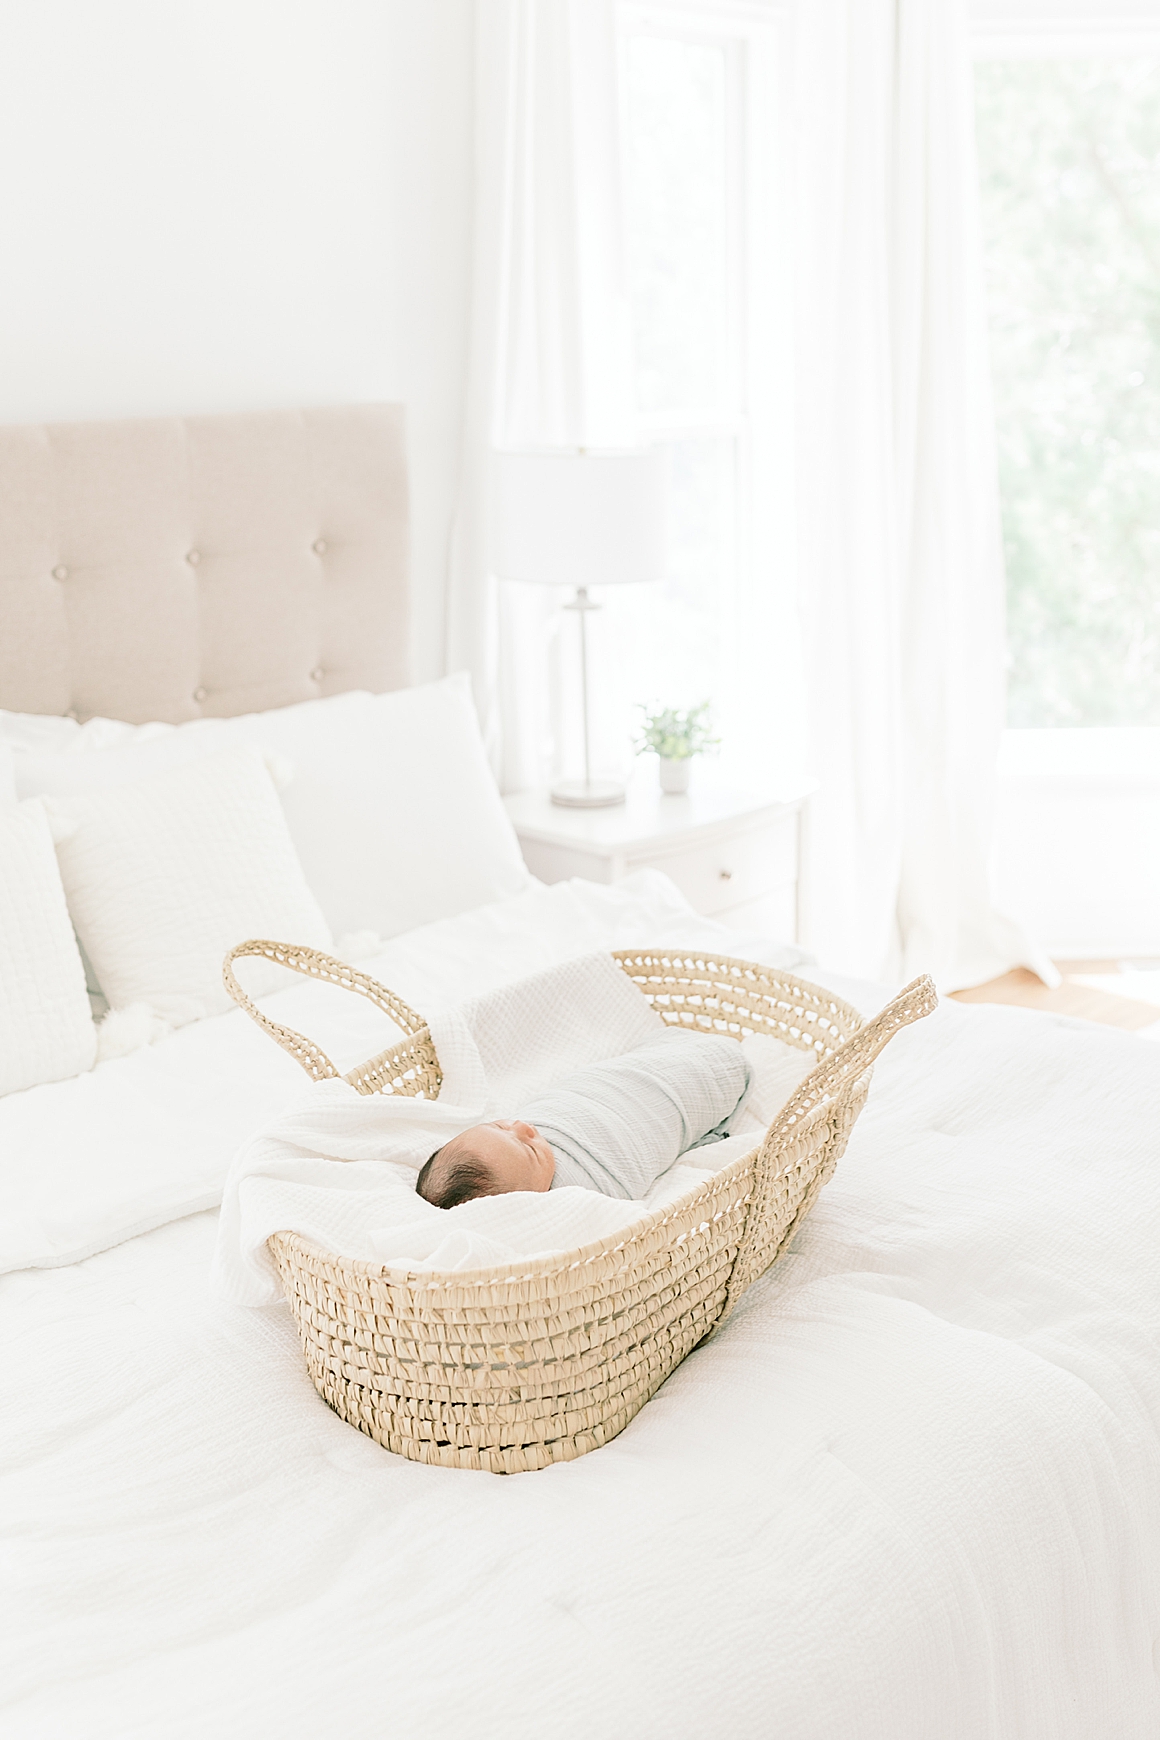 Baby in Moses Basket for in-home newborn session. Photos by Charleston Newborn Photographer, Caitlyn Motycka Photography.